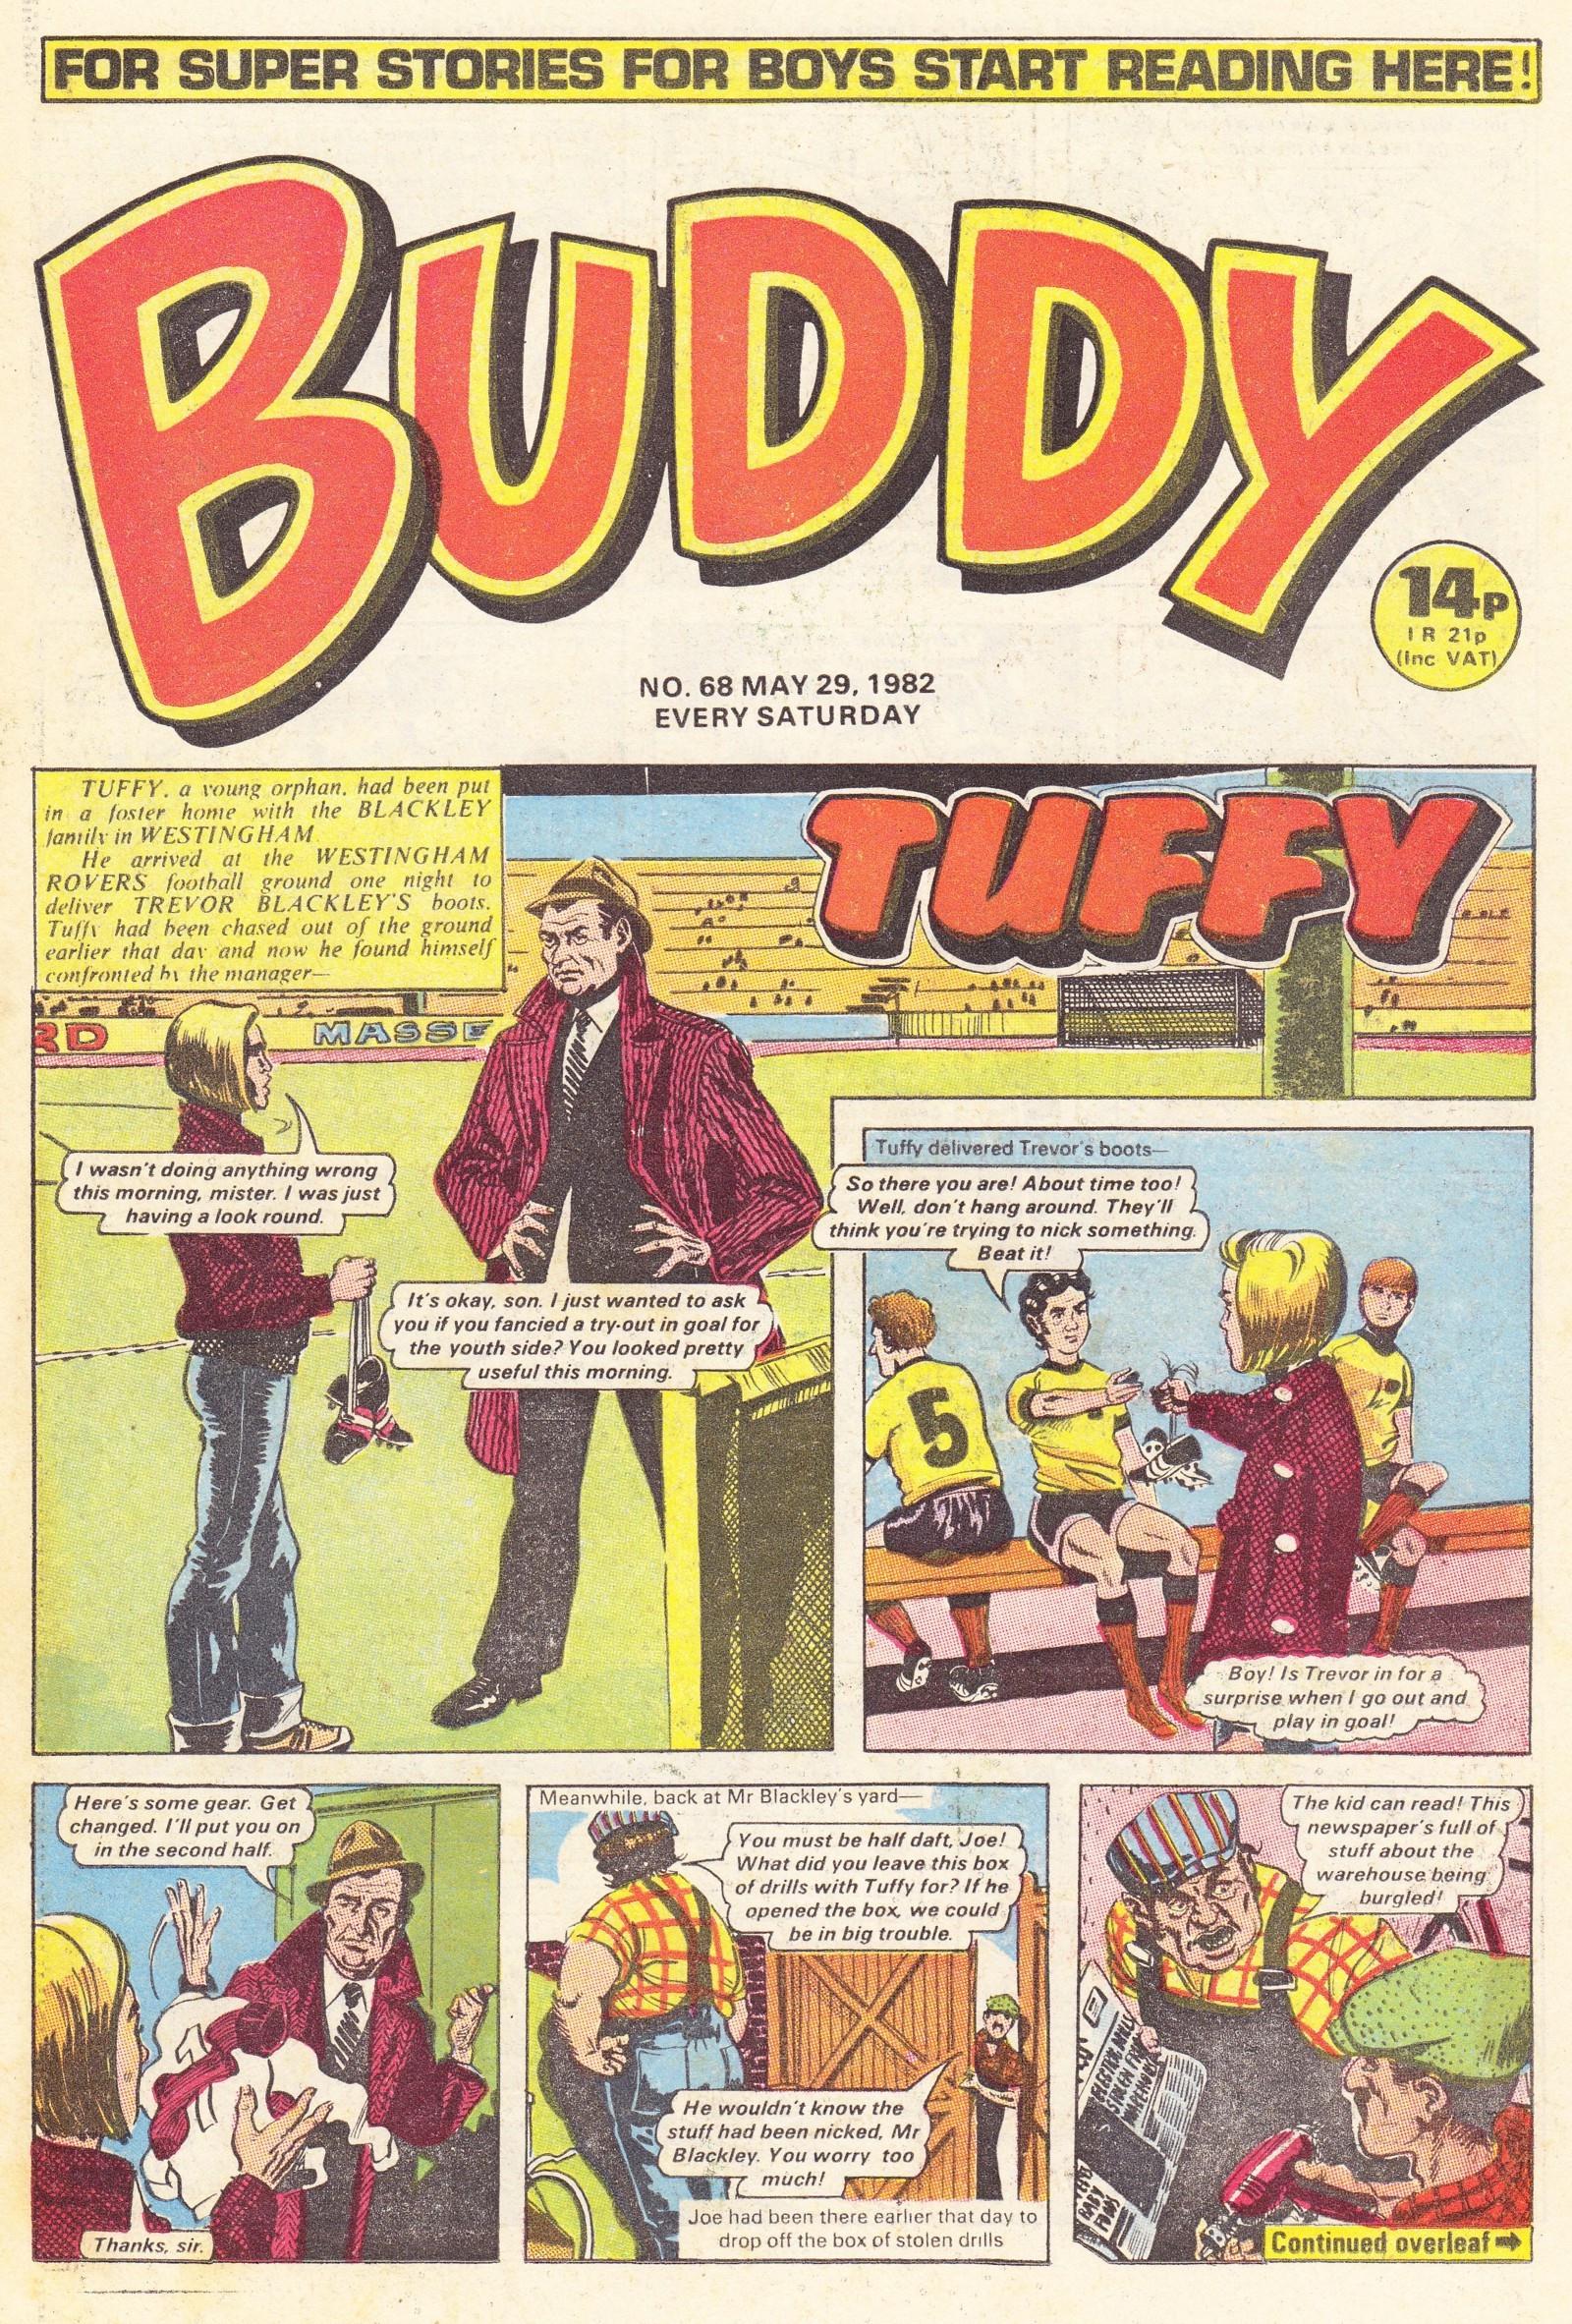 Read online Buddy comic -  Issue #68 - 1